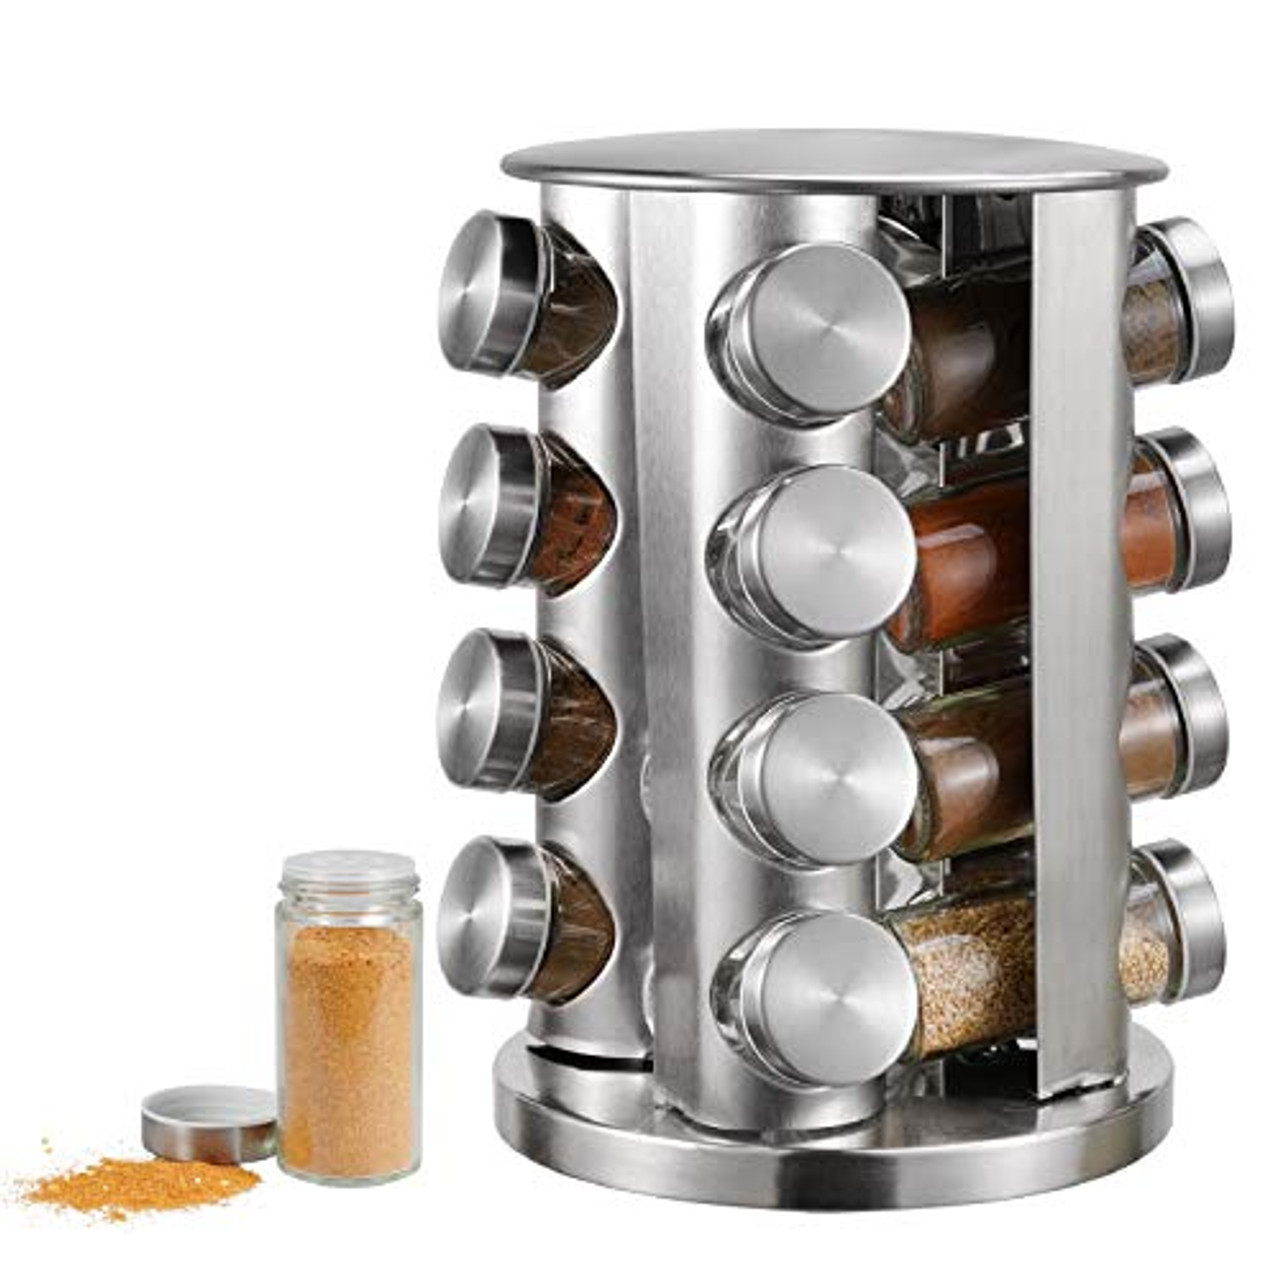 16-Jar Revolving Countertop Spice Rack with Free Spice Refills for 5 Years